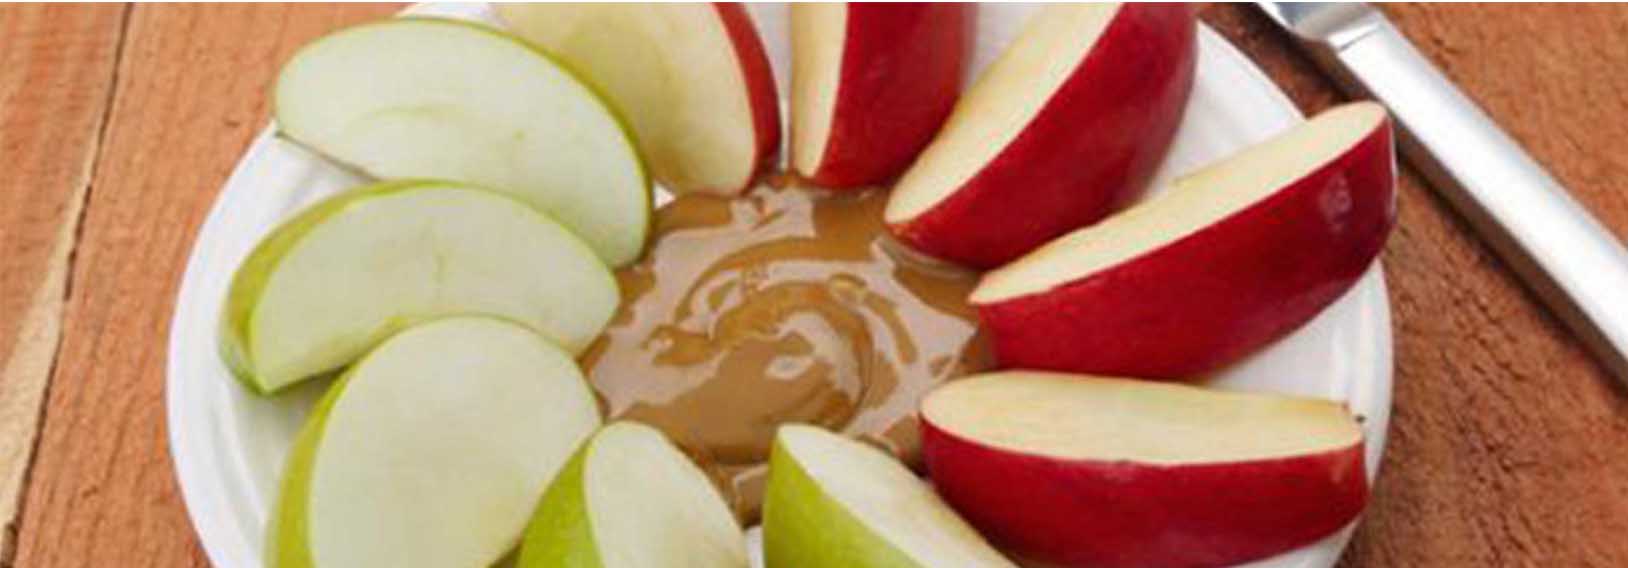 10 Fun, Simple, and Delicious Ways To Eat Apples - That's it Canada